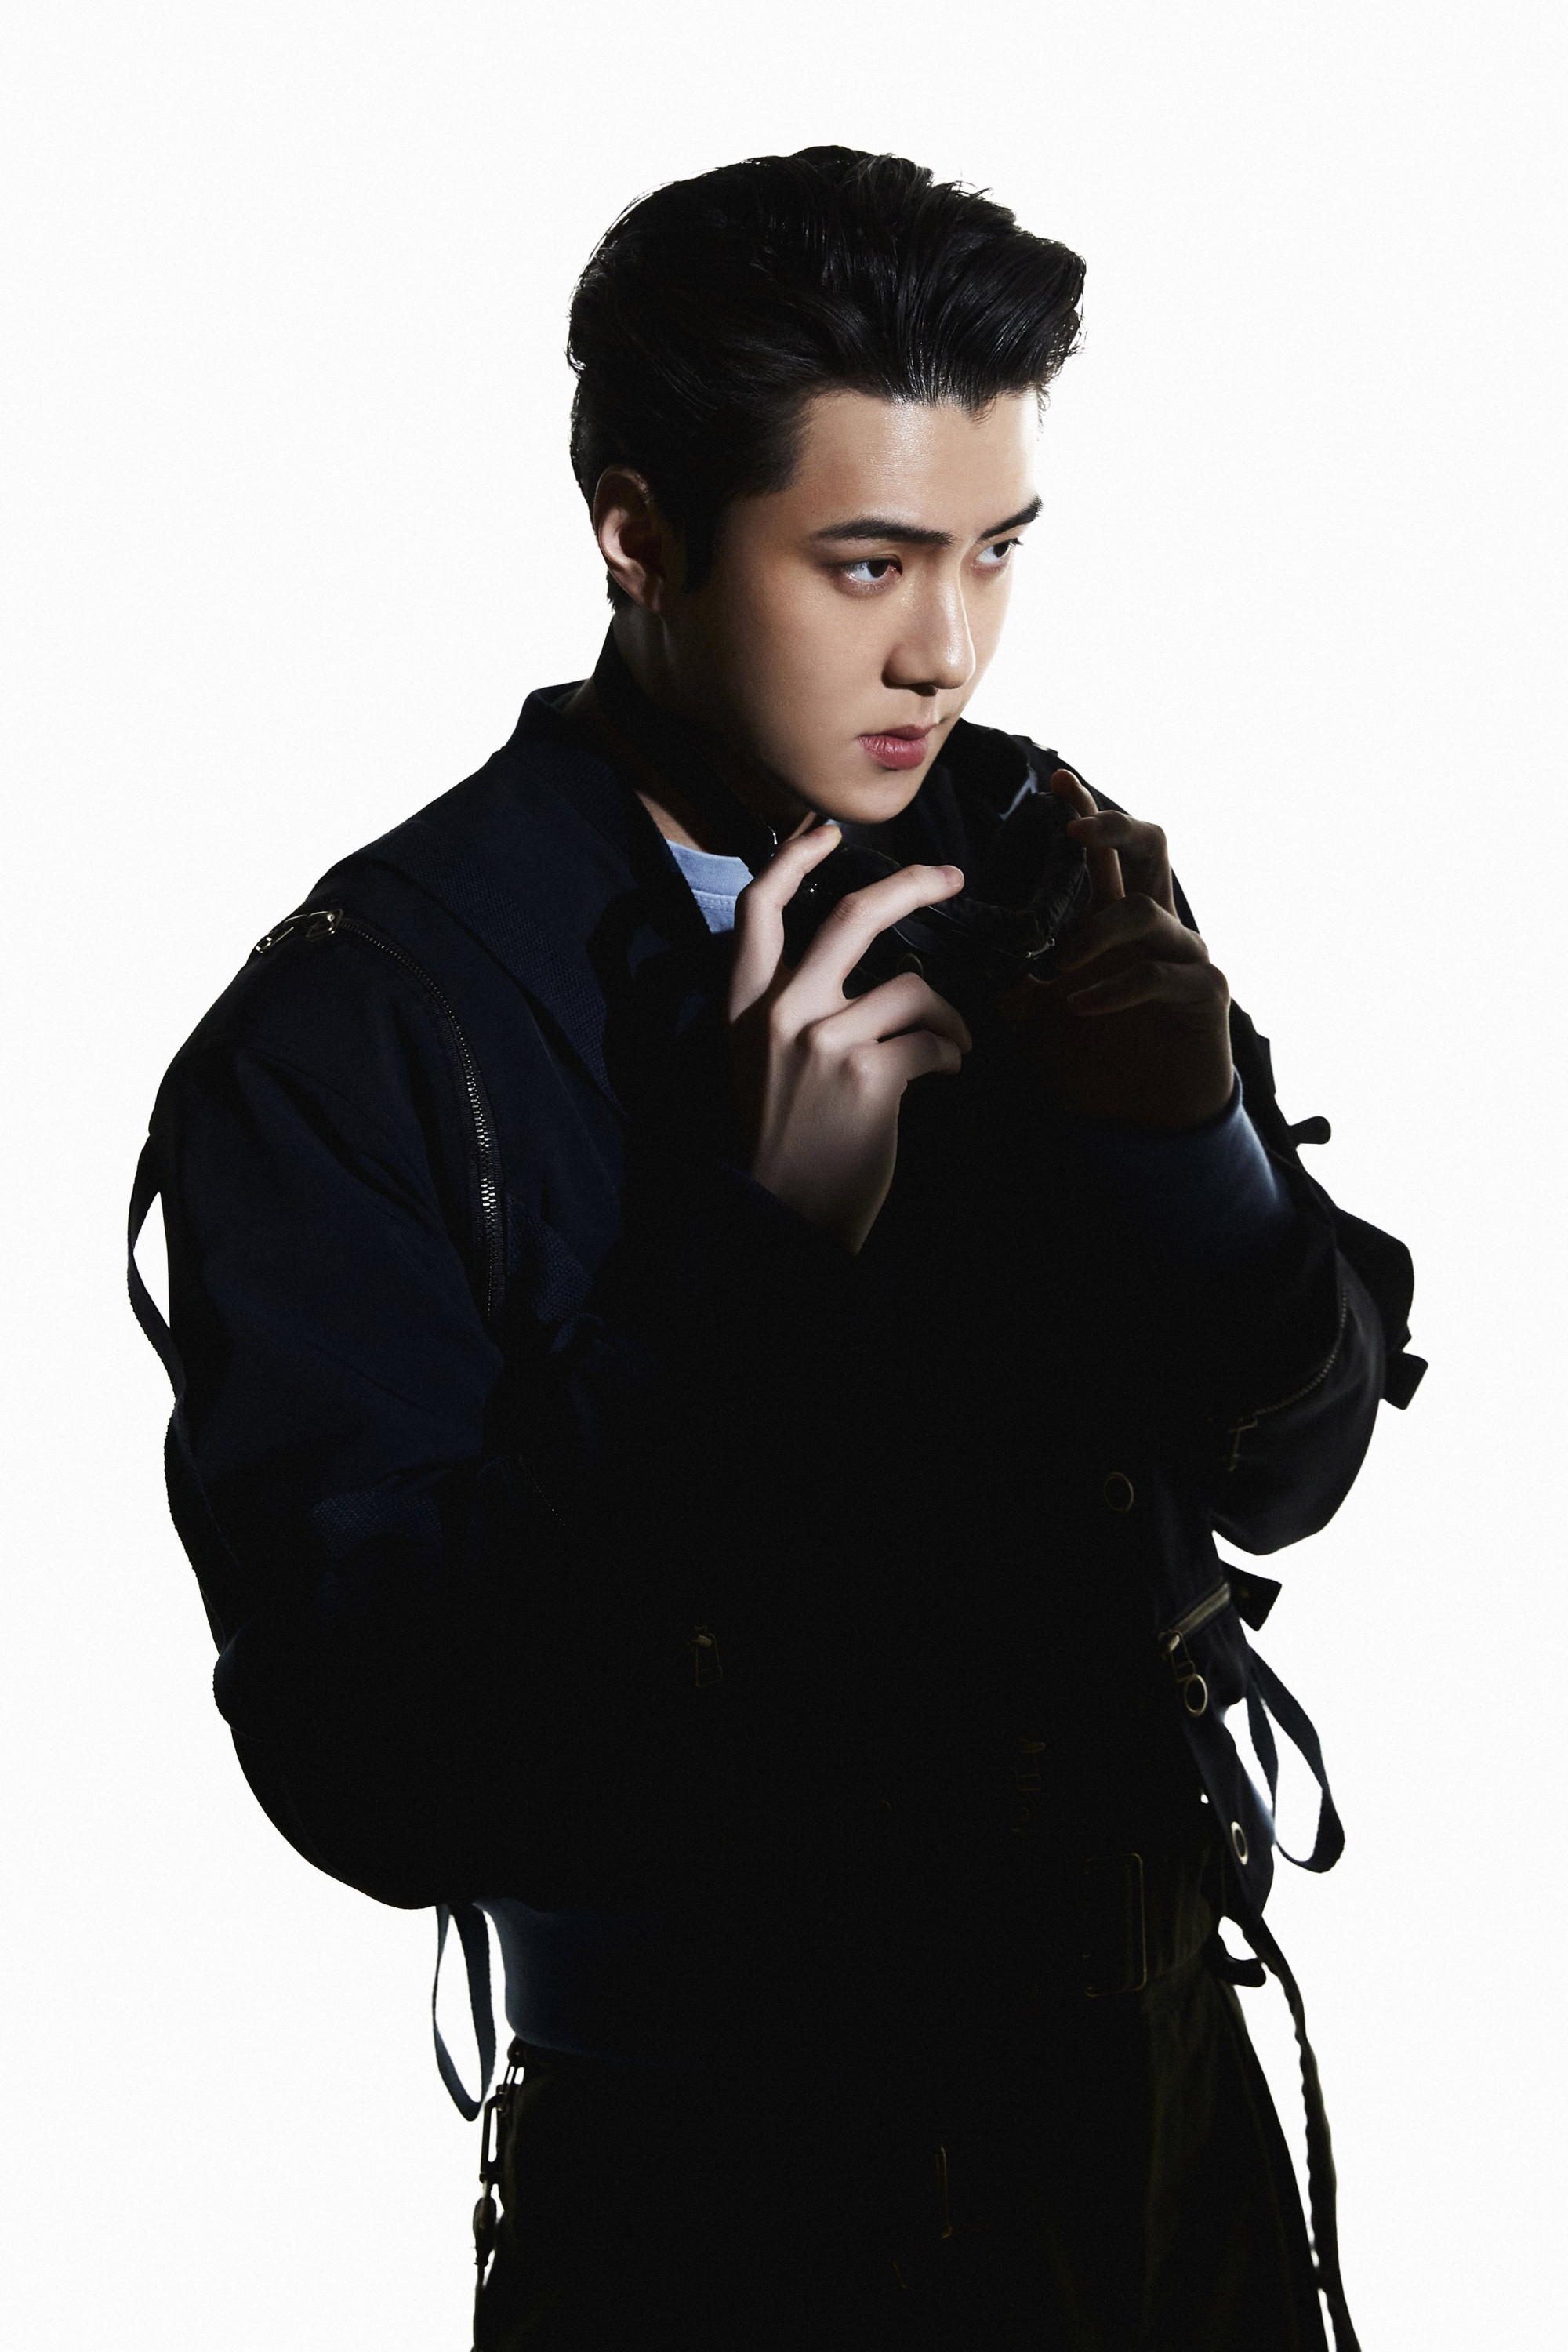 EXO Sehun "Eclipse" Teasers [Don't Fight The Feeling]